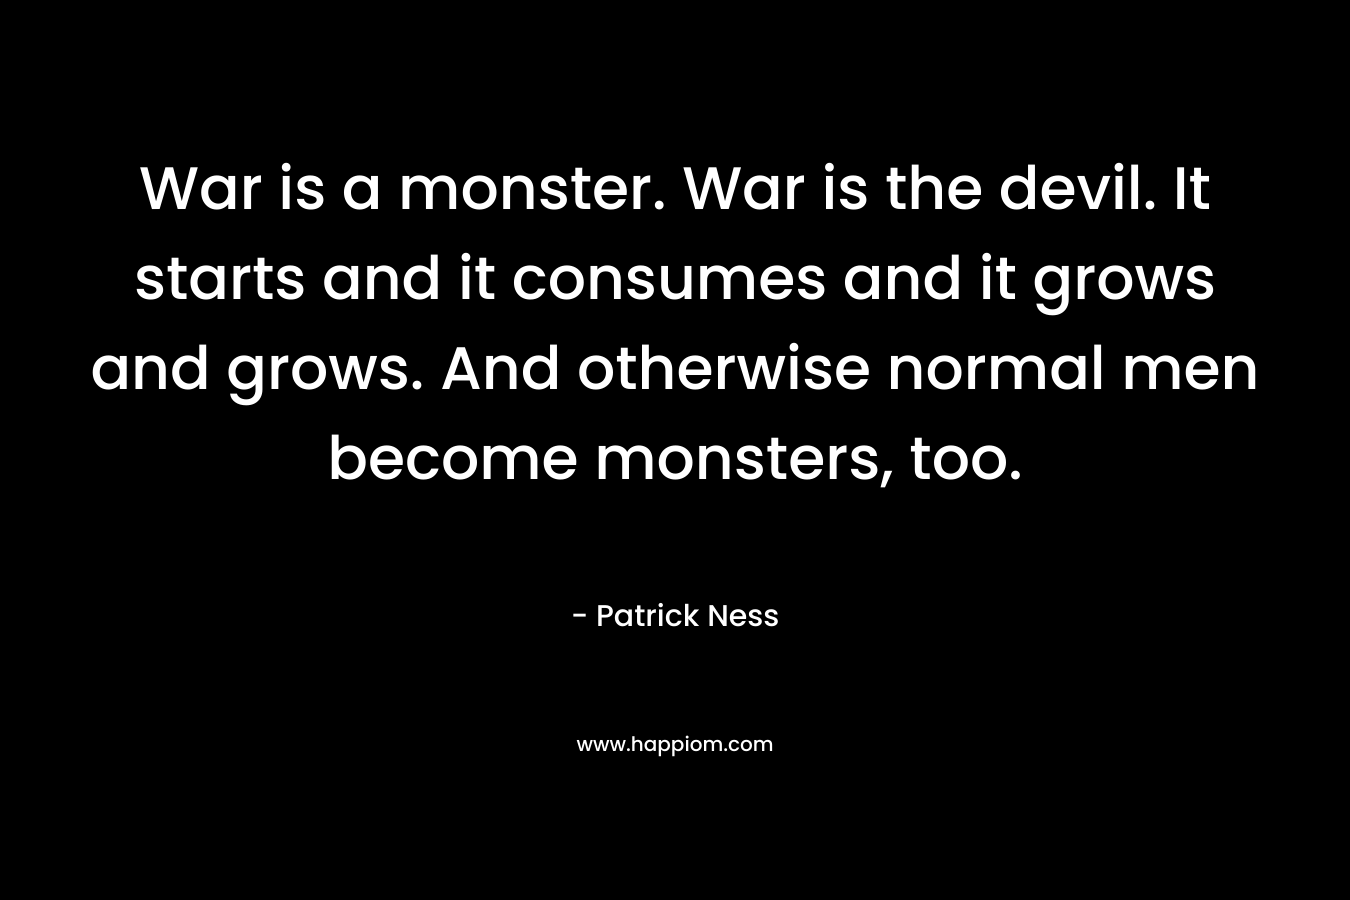 War is a monster. War is the devil. It starts and it consumes and it grows and grows. And otherwise normal men become monsters, too.